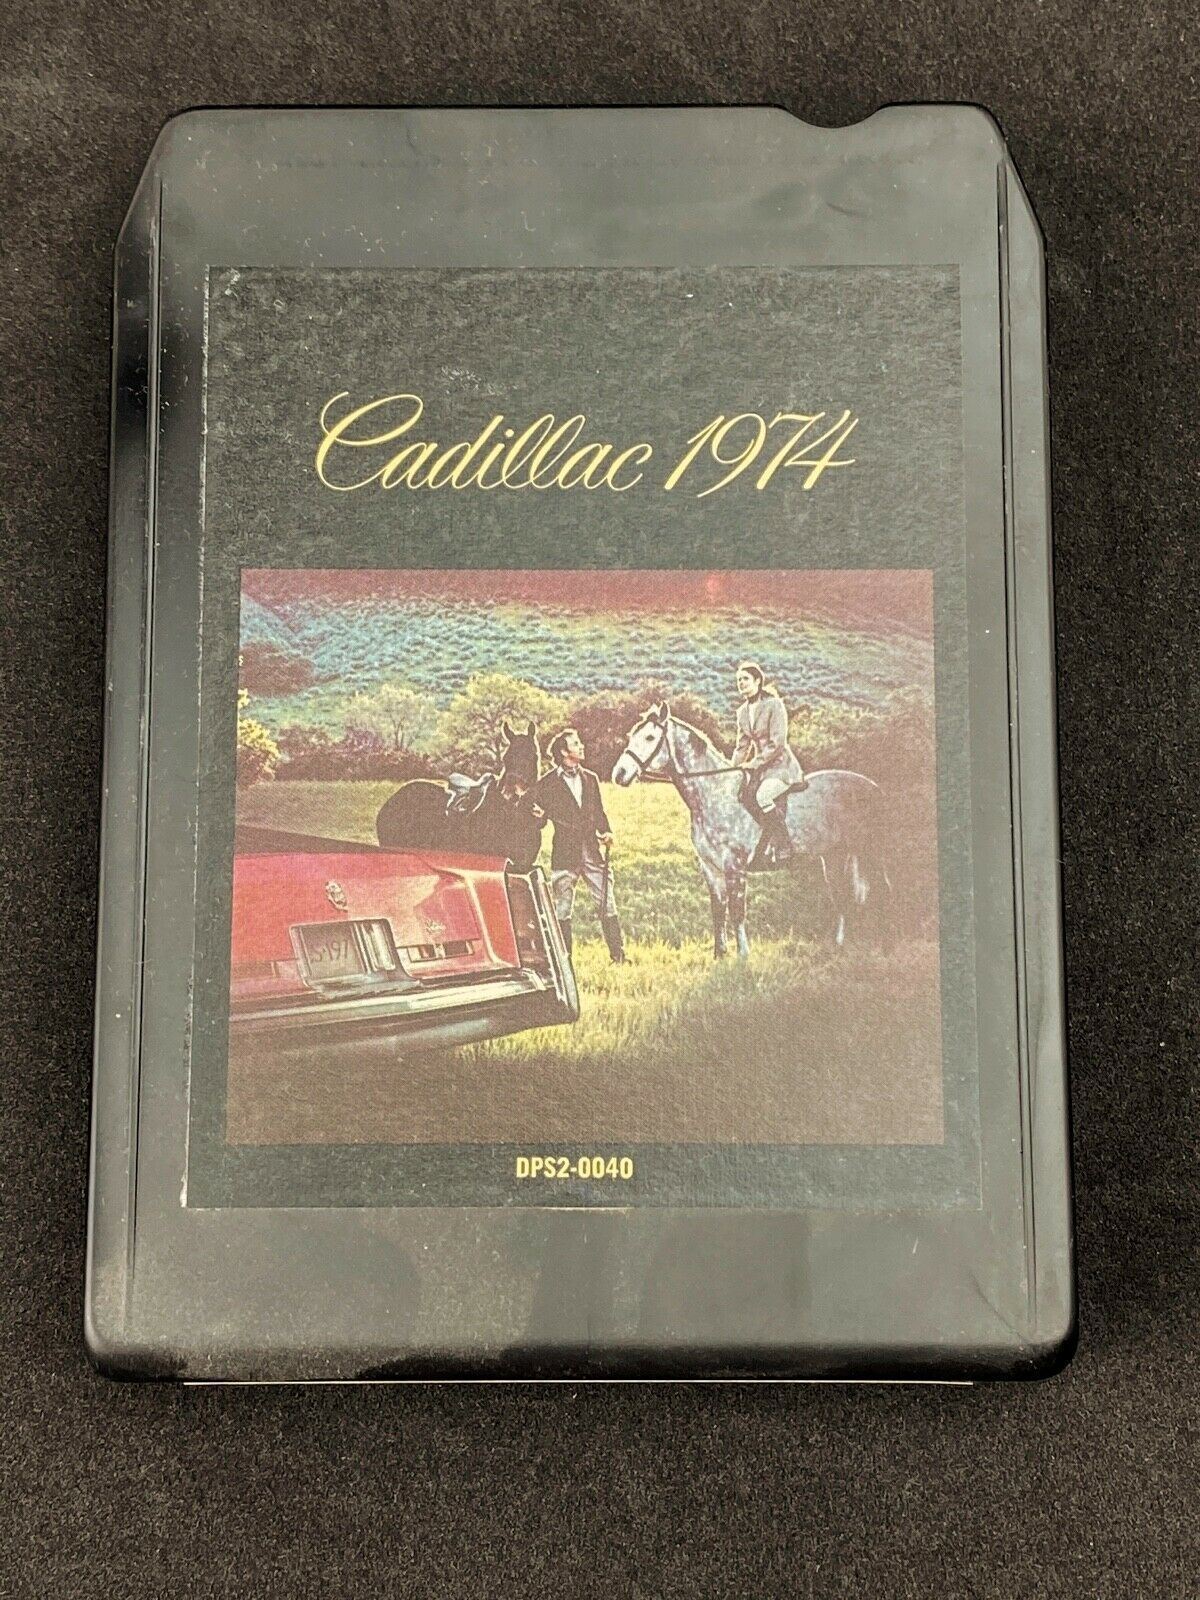 1974 CADILLAC MUSIC Across the Wide Country 8-Track Tape (Vintage)